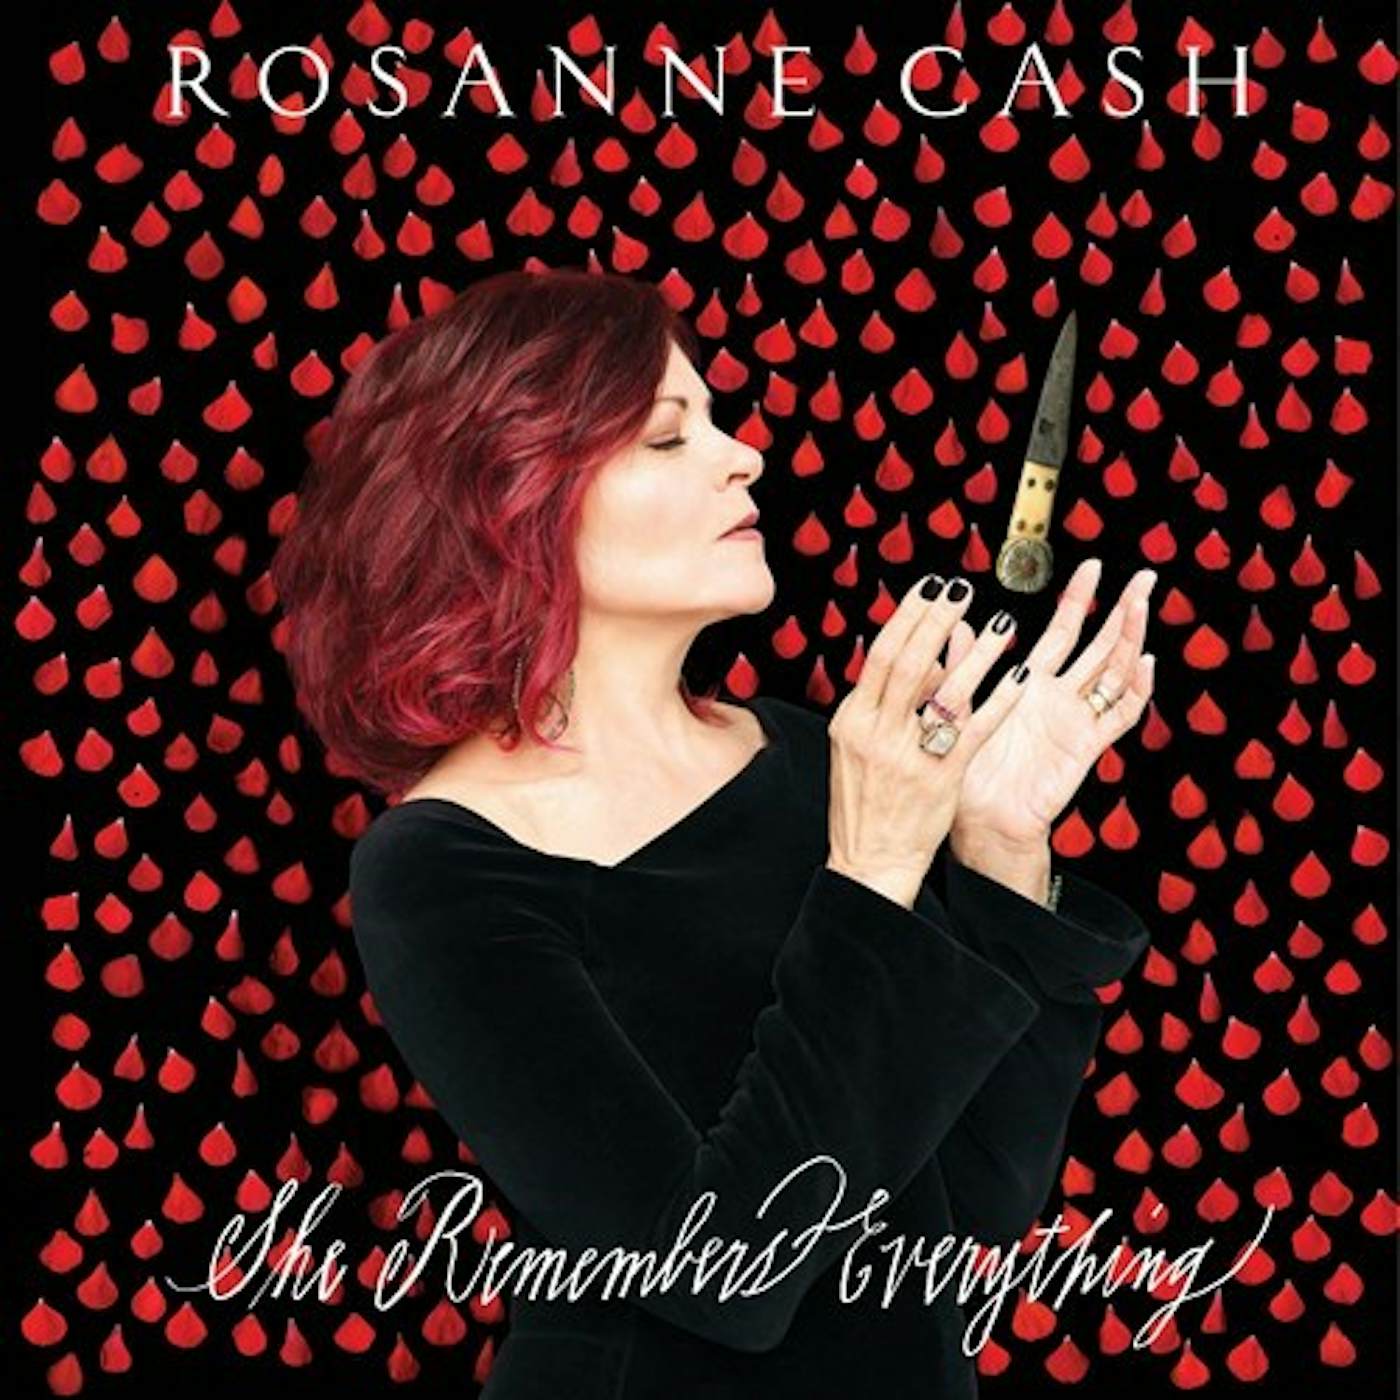 Rosanne Cash She Remembers Everything Vinyl Record